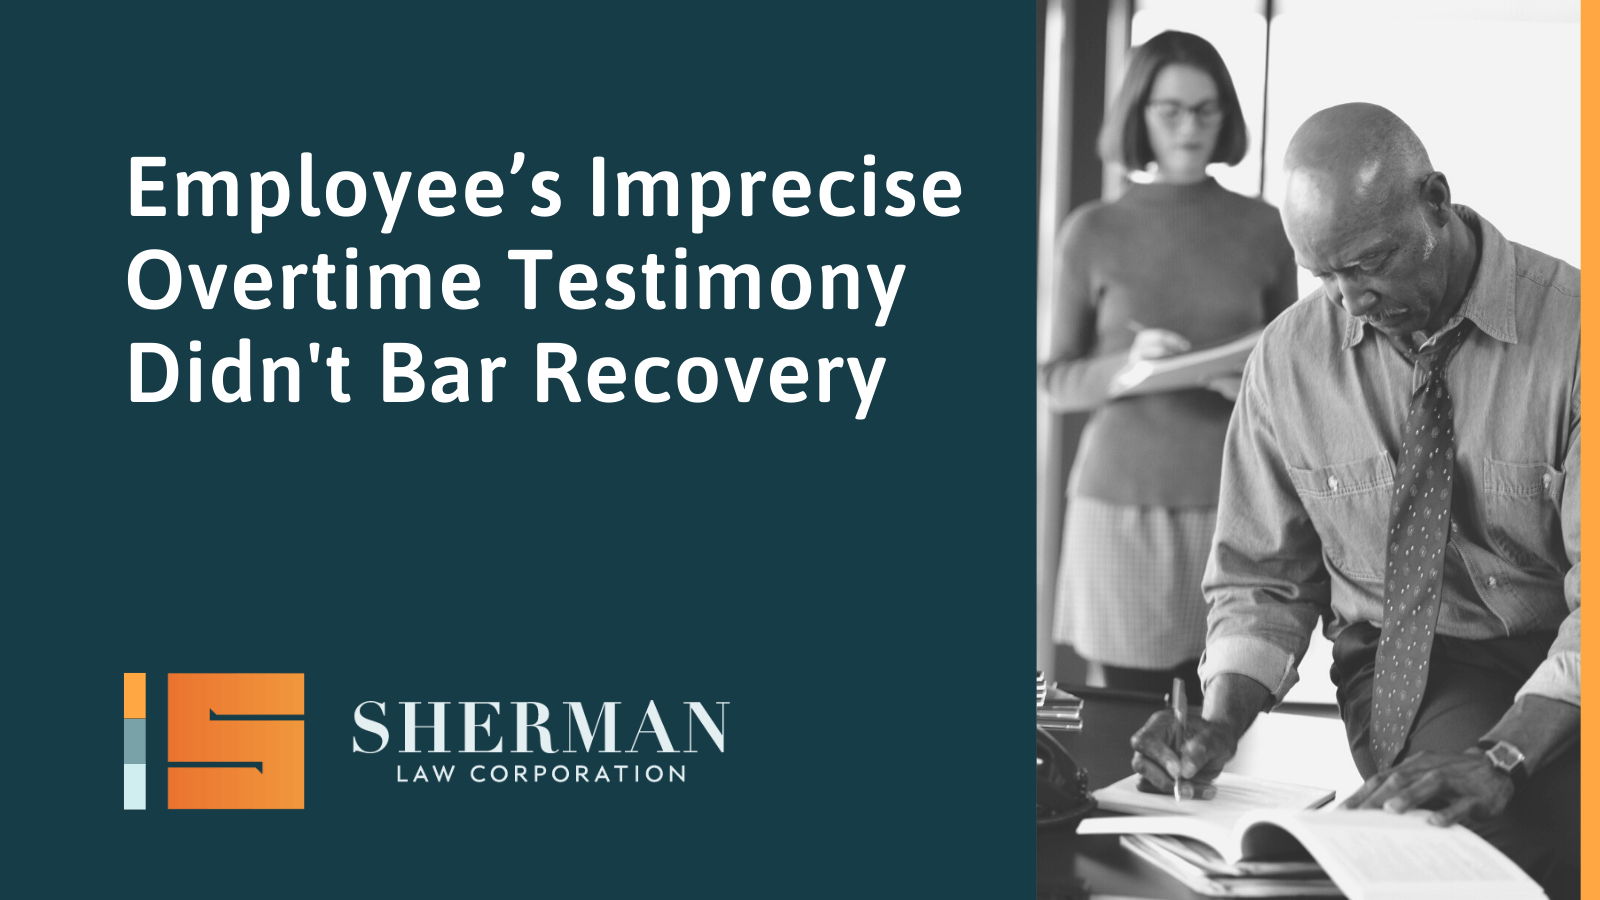 Employee’s Imprecise Overtime Testimony Didn't Bar Recovery- california employment lawyer - sherman law corporation